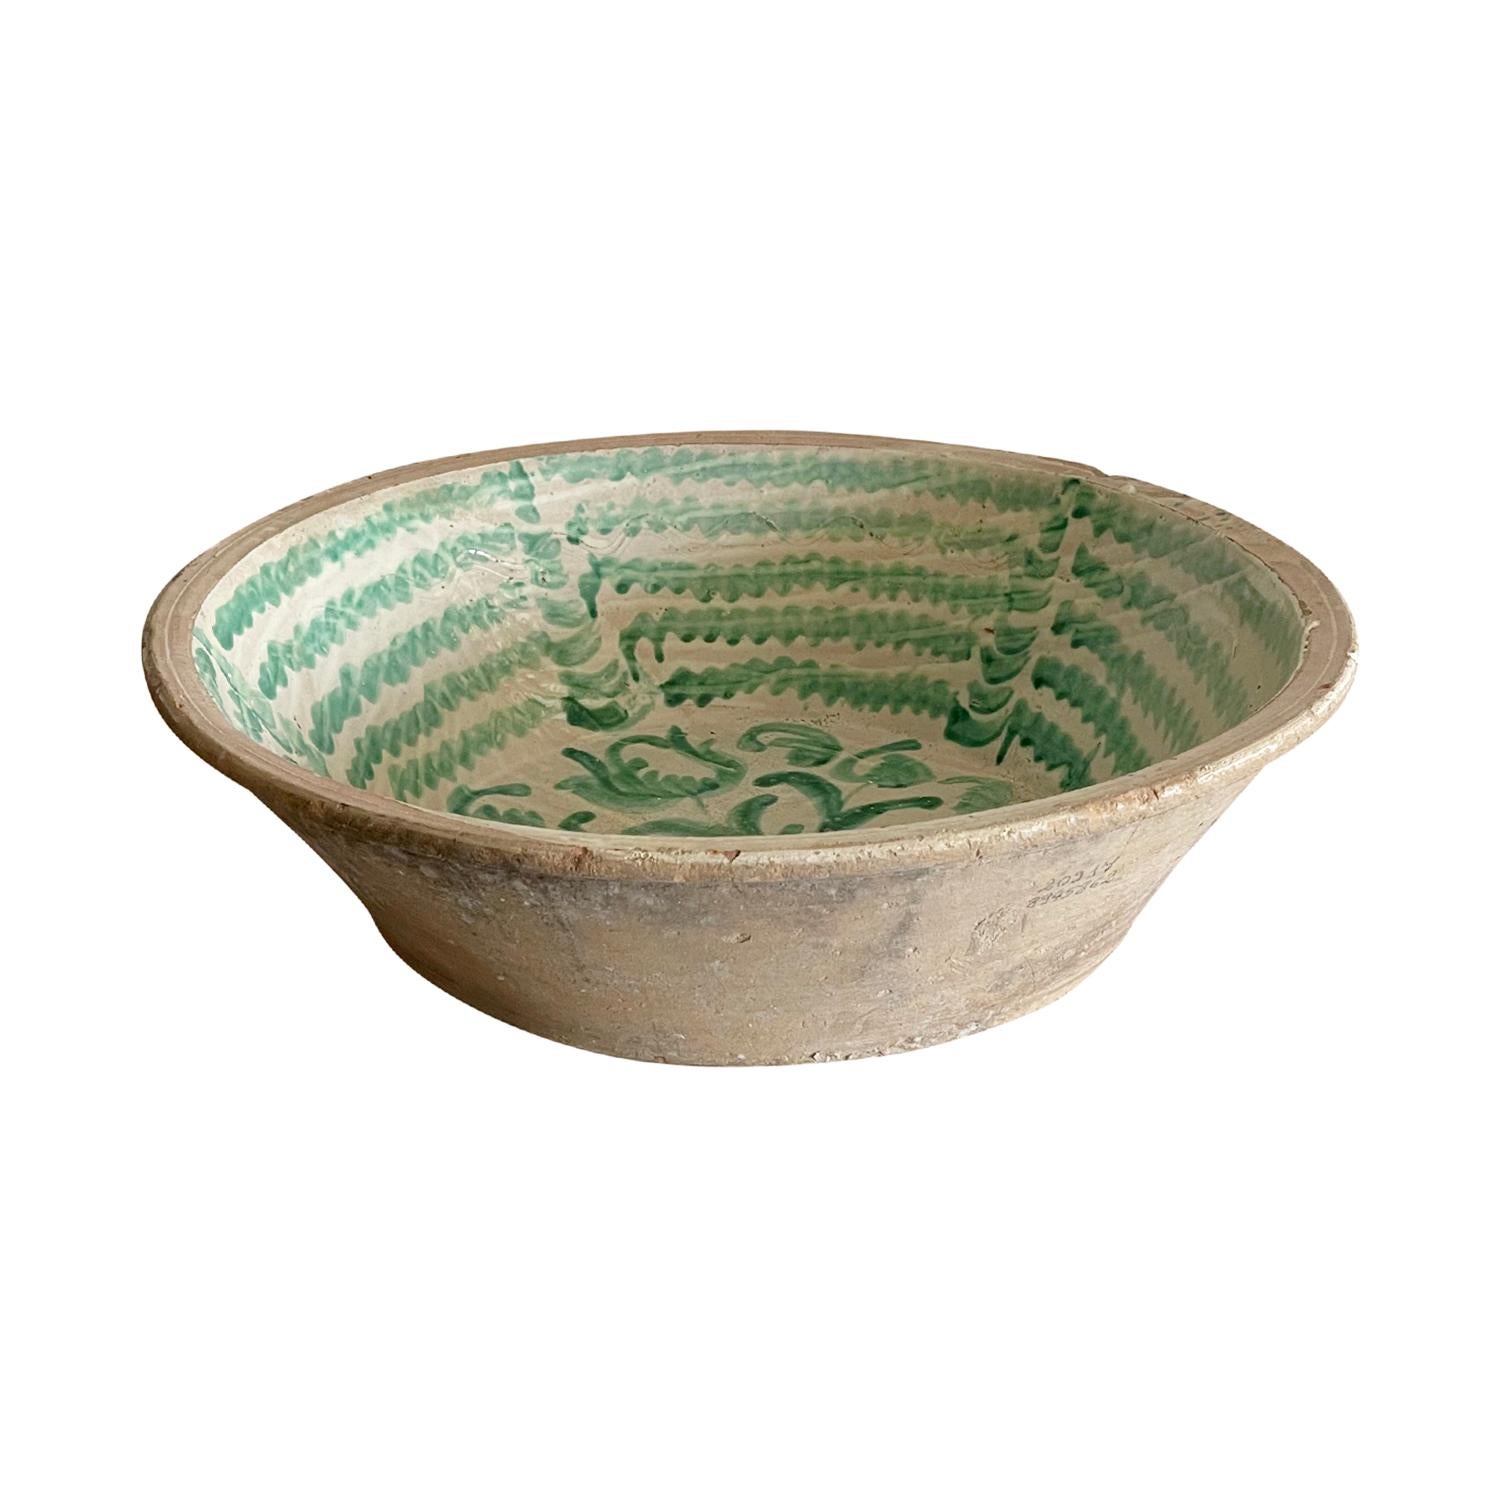 A very large antique Spanish Lebrillo mixing bowl in earthenware, made of hand crafted terra cotta, originating from Granada, Spain. Featuring a glaze decoration in the typical Morisco green over a milk-white glaze. A floral motif is painted onto